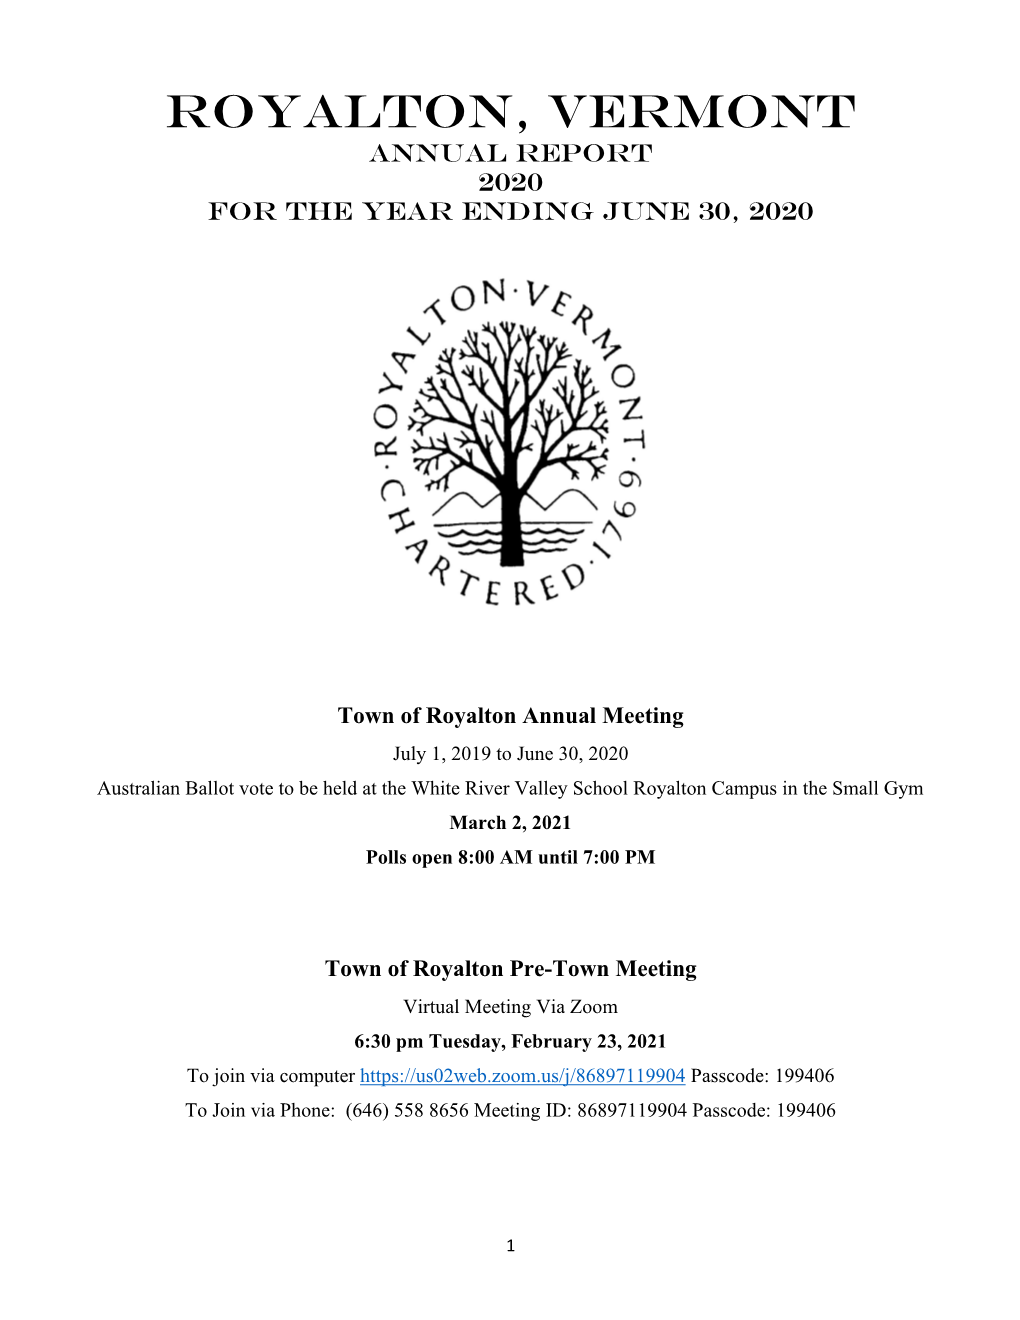 Royalton, Vermont Annual Report 2020 for the Year Ending June 30, 2020